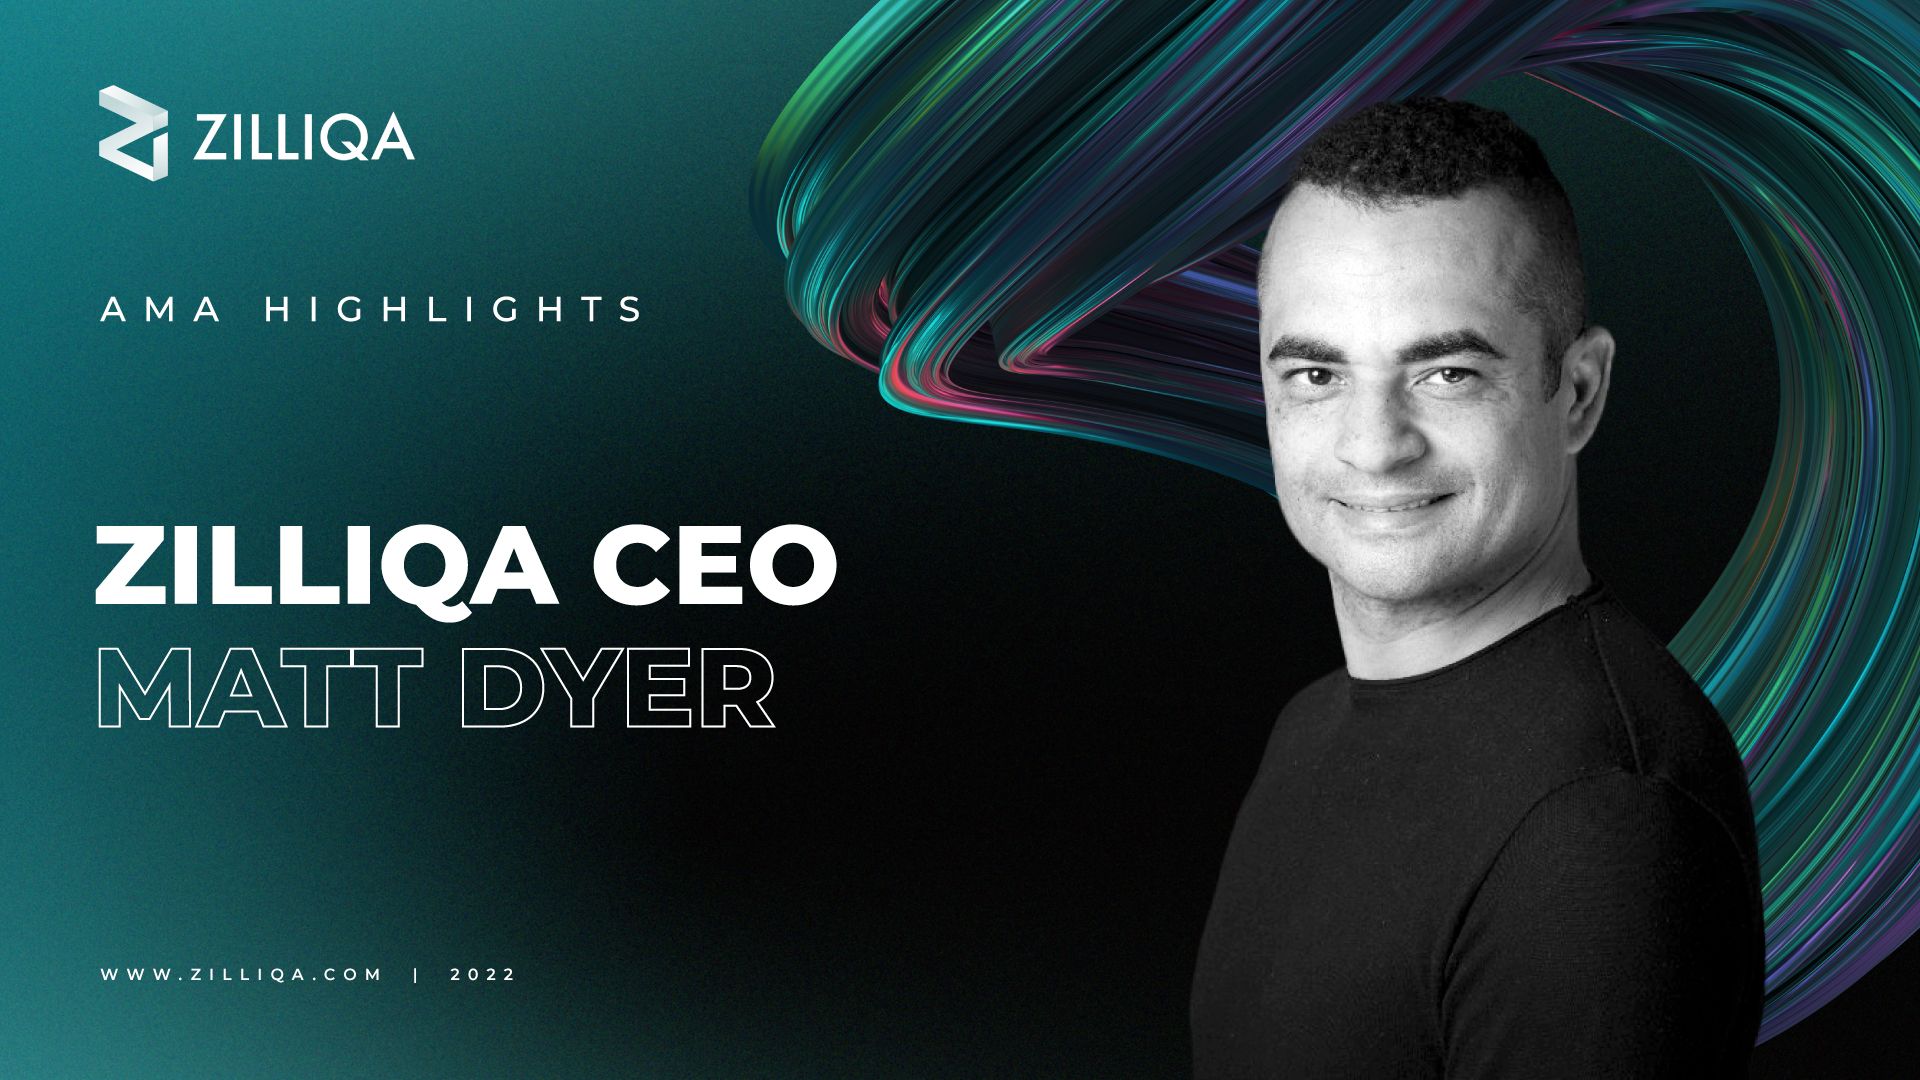 Matt Dyer lays out Zilliqa’s plans for 2023